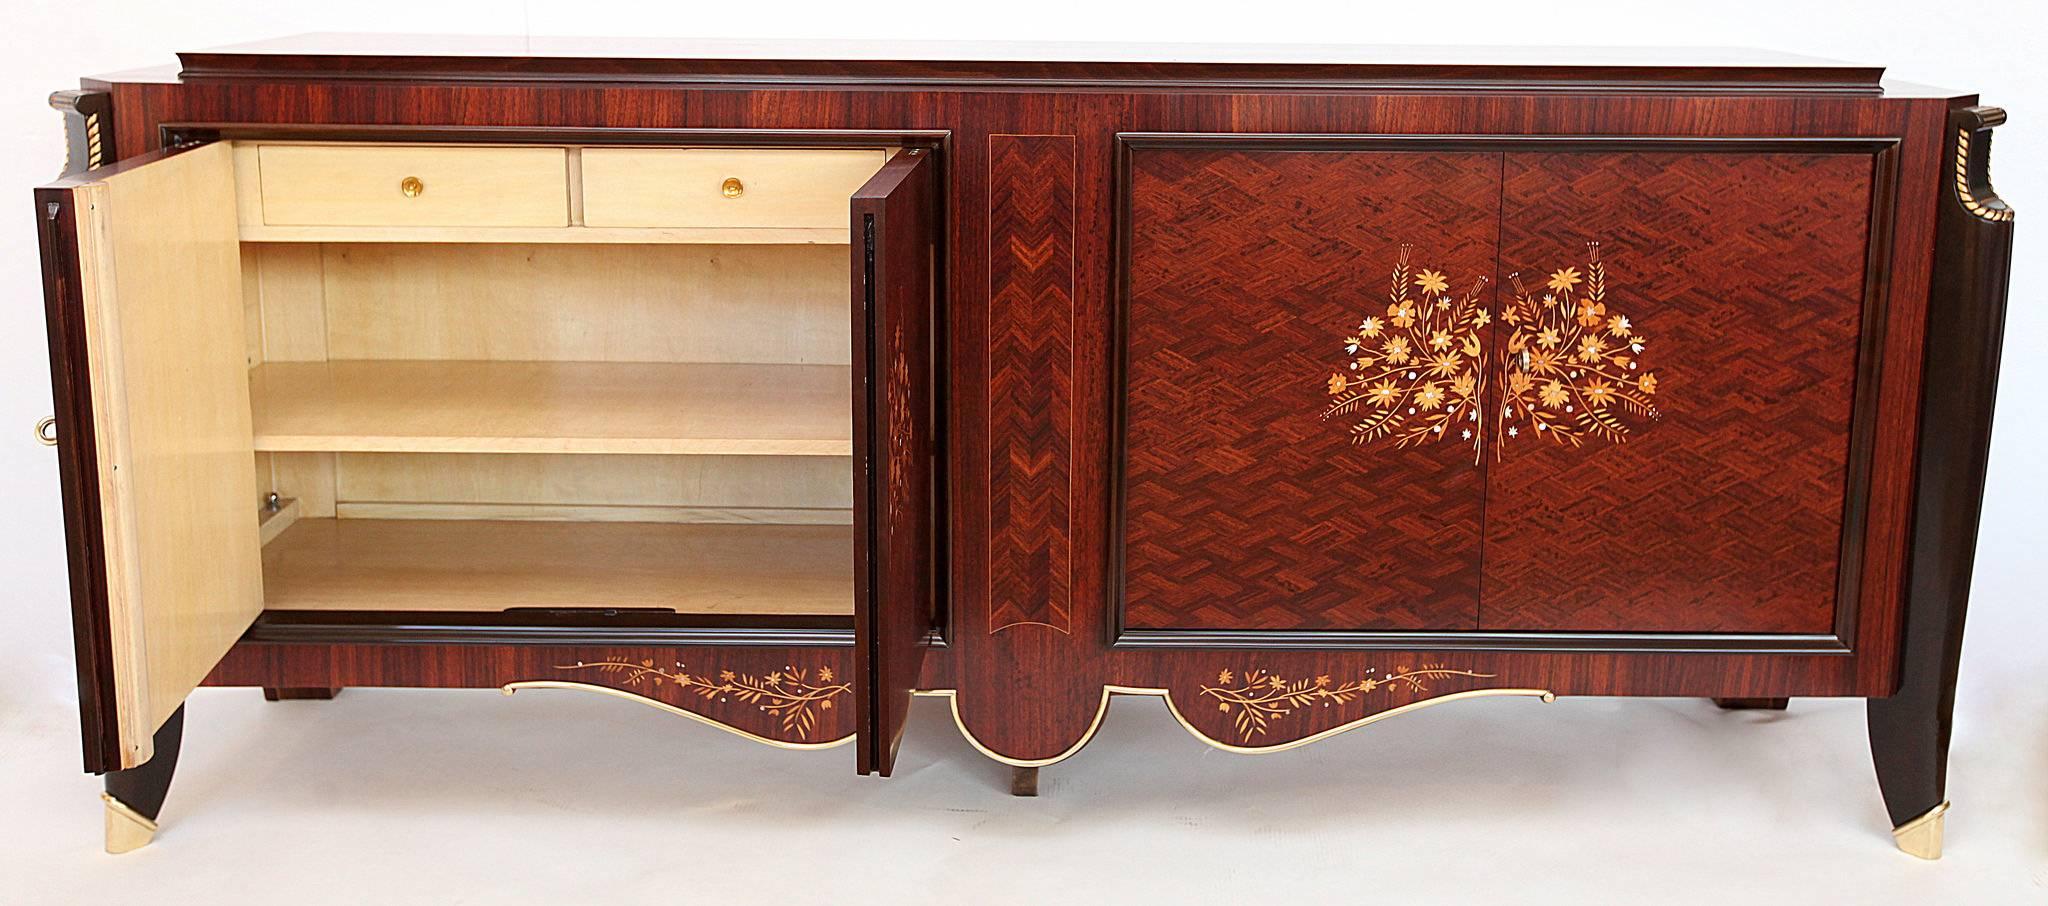 A beautiful Jules Leleu French Art Deco buffet/sideboard with diamond patterned rosewood, walnut supports, satinwood and mother-of-pearl inlay, giltwood edging and raised on bronze sabots. The interior is lemonwood veneer.